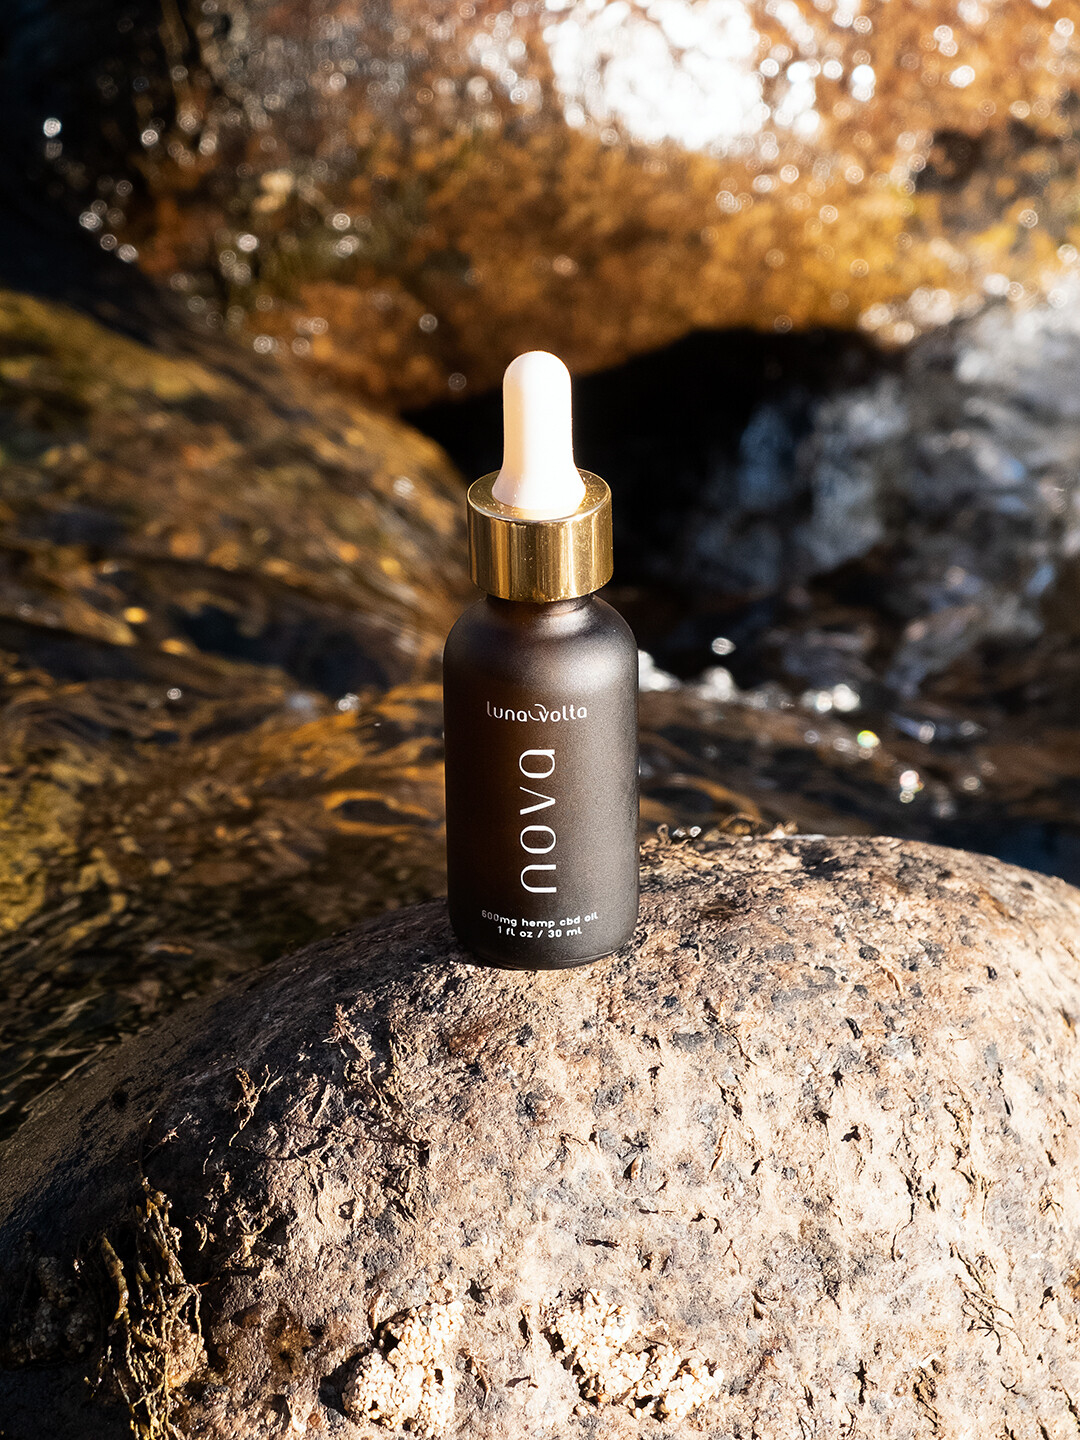 The NOVA, a premium wellness hemp oil, by Luna Volta product recommended by Kayla Clements on Improve Her Health.